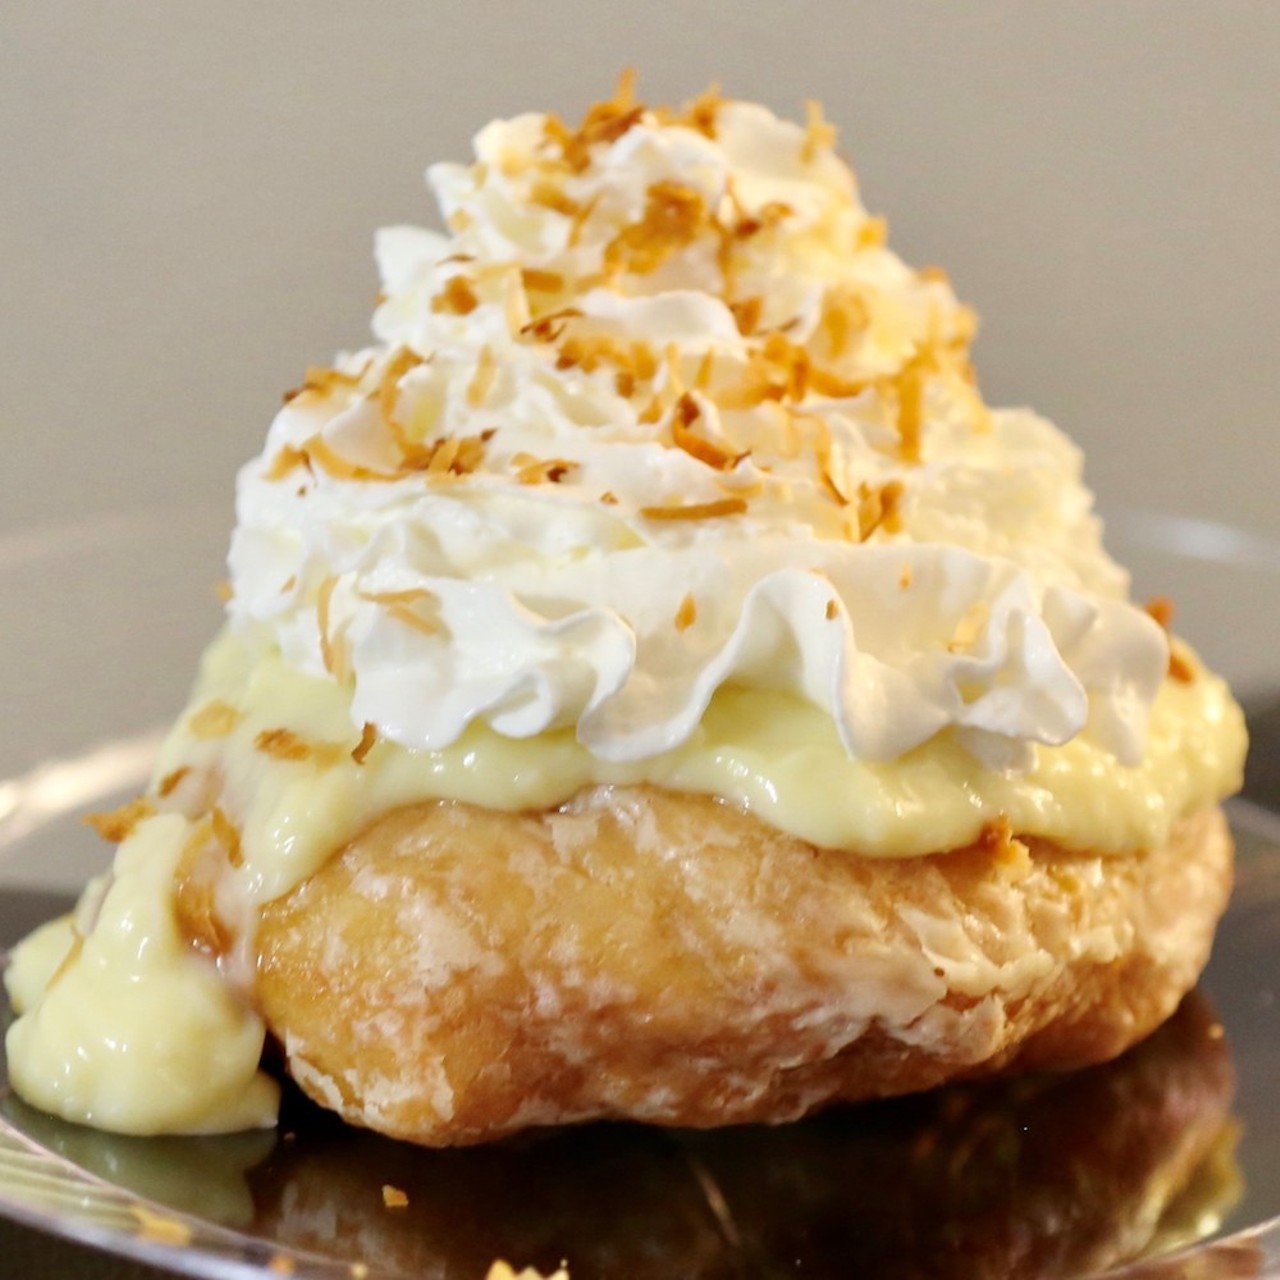 Coconut Cream Doughnut
One of the most fiercely loved vendors is Peachey's Baking Co. Coconut cream only enhances this old-fashioned Amish treat.